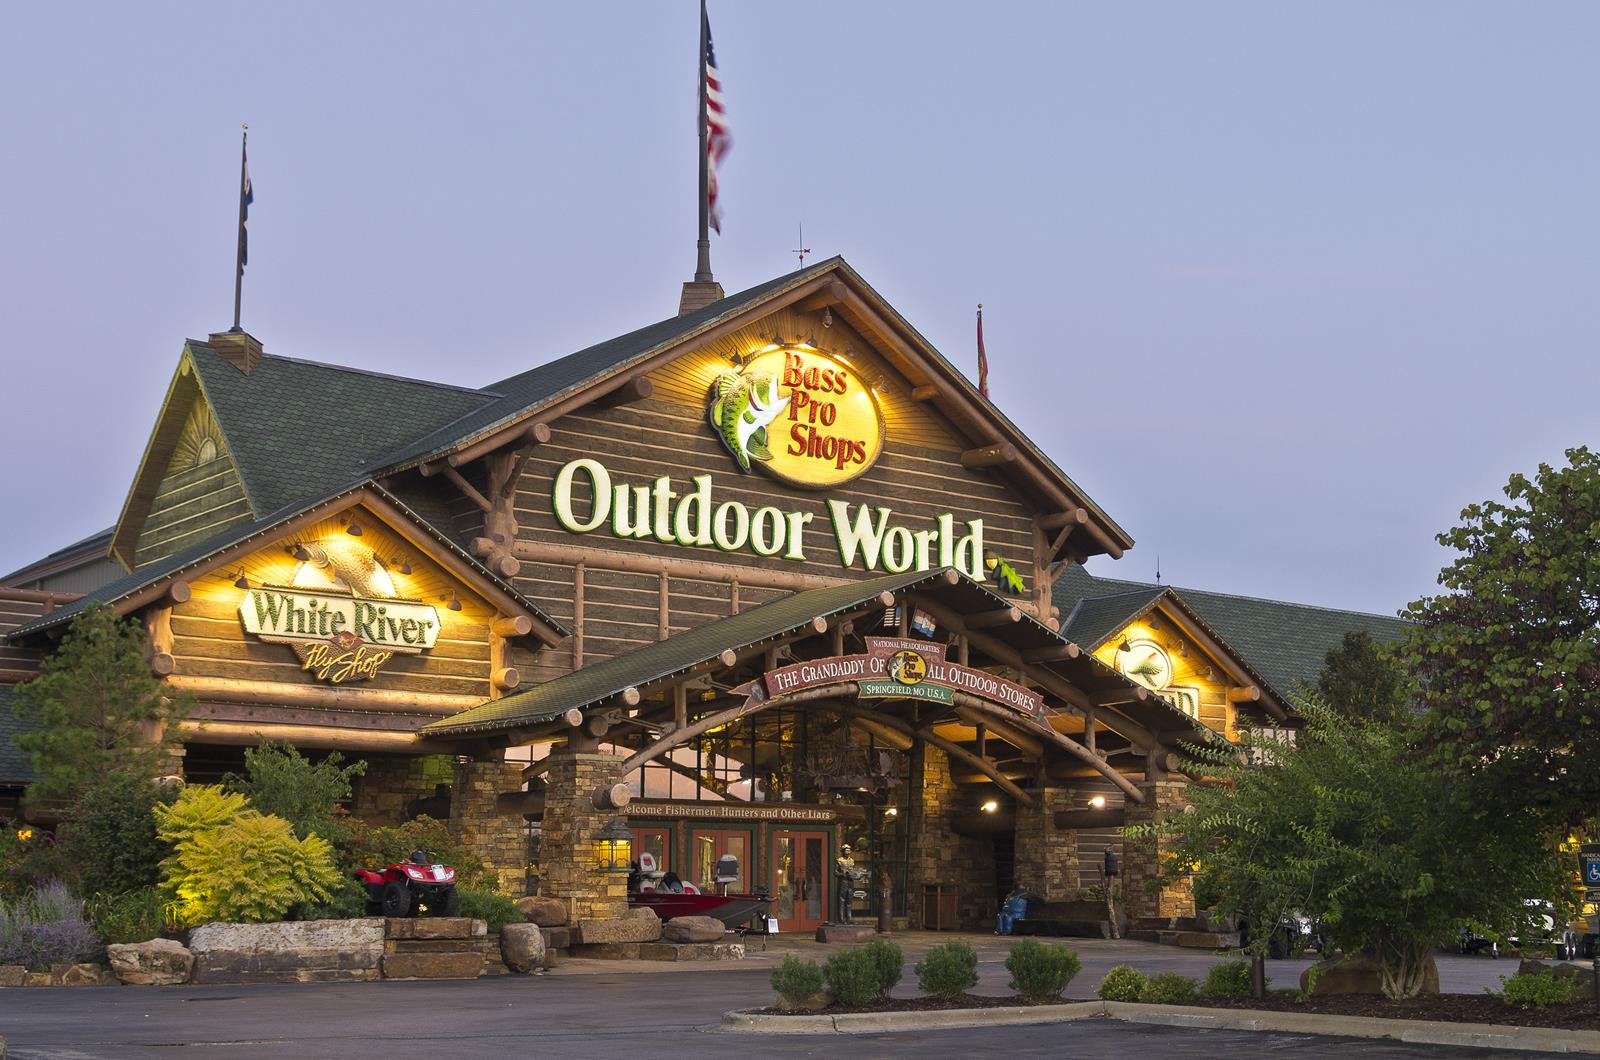 Just off Route 66 is the largest Bass Pro Shops location in the United States, which also serves as the headquarters